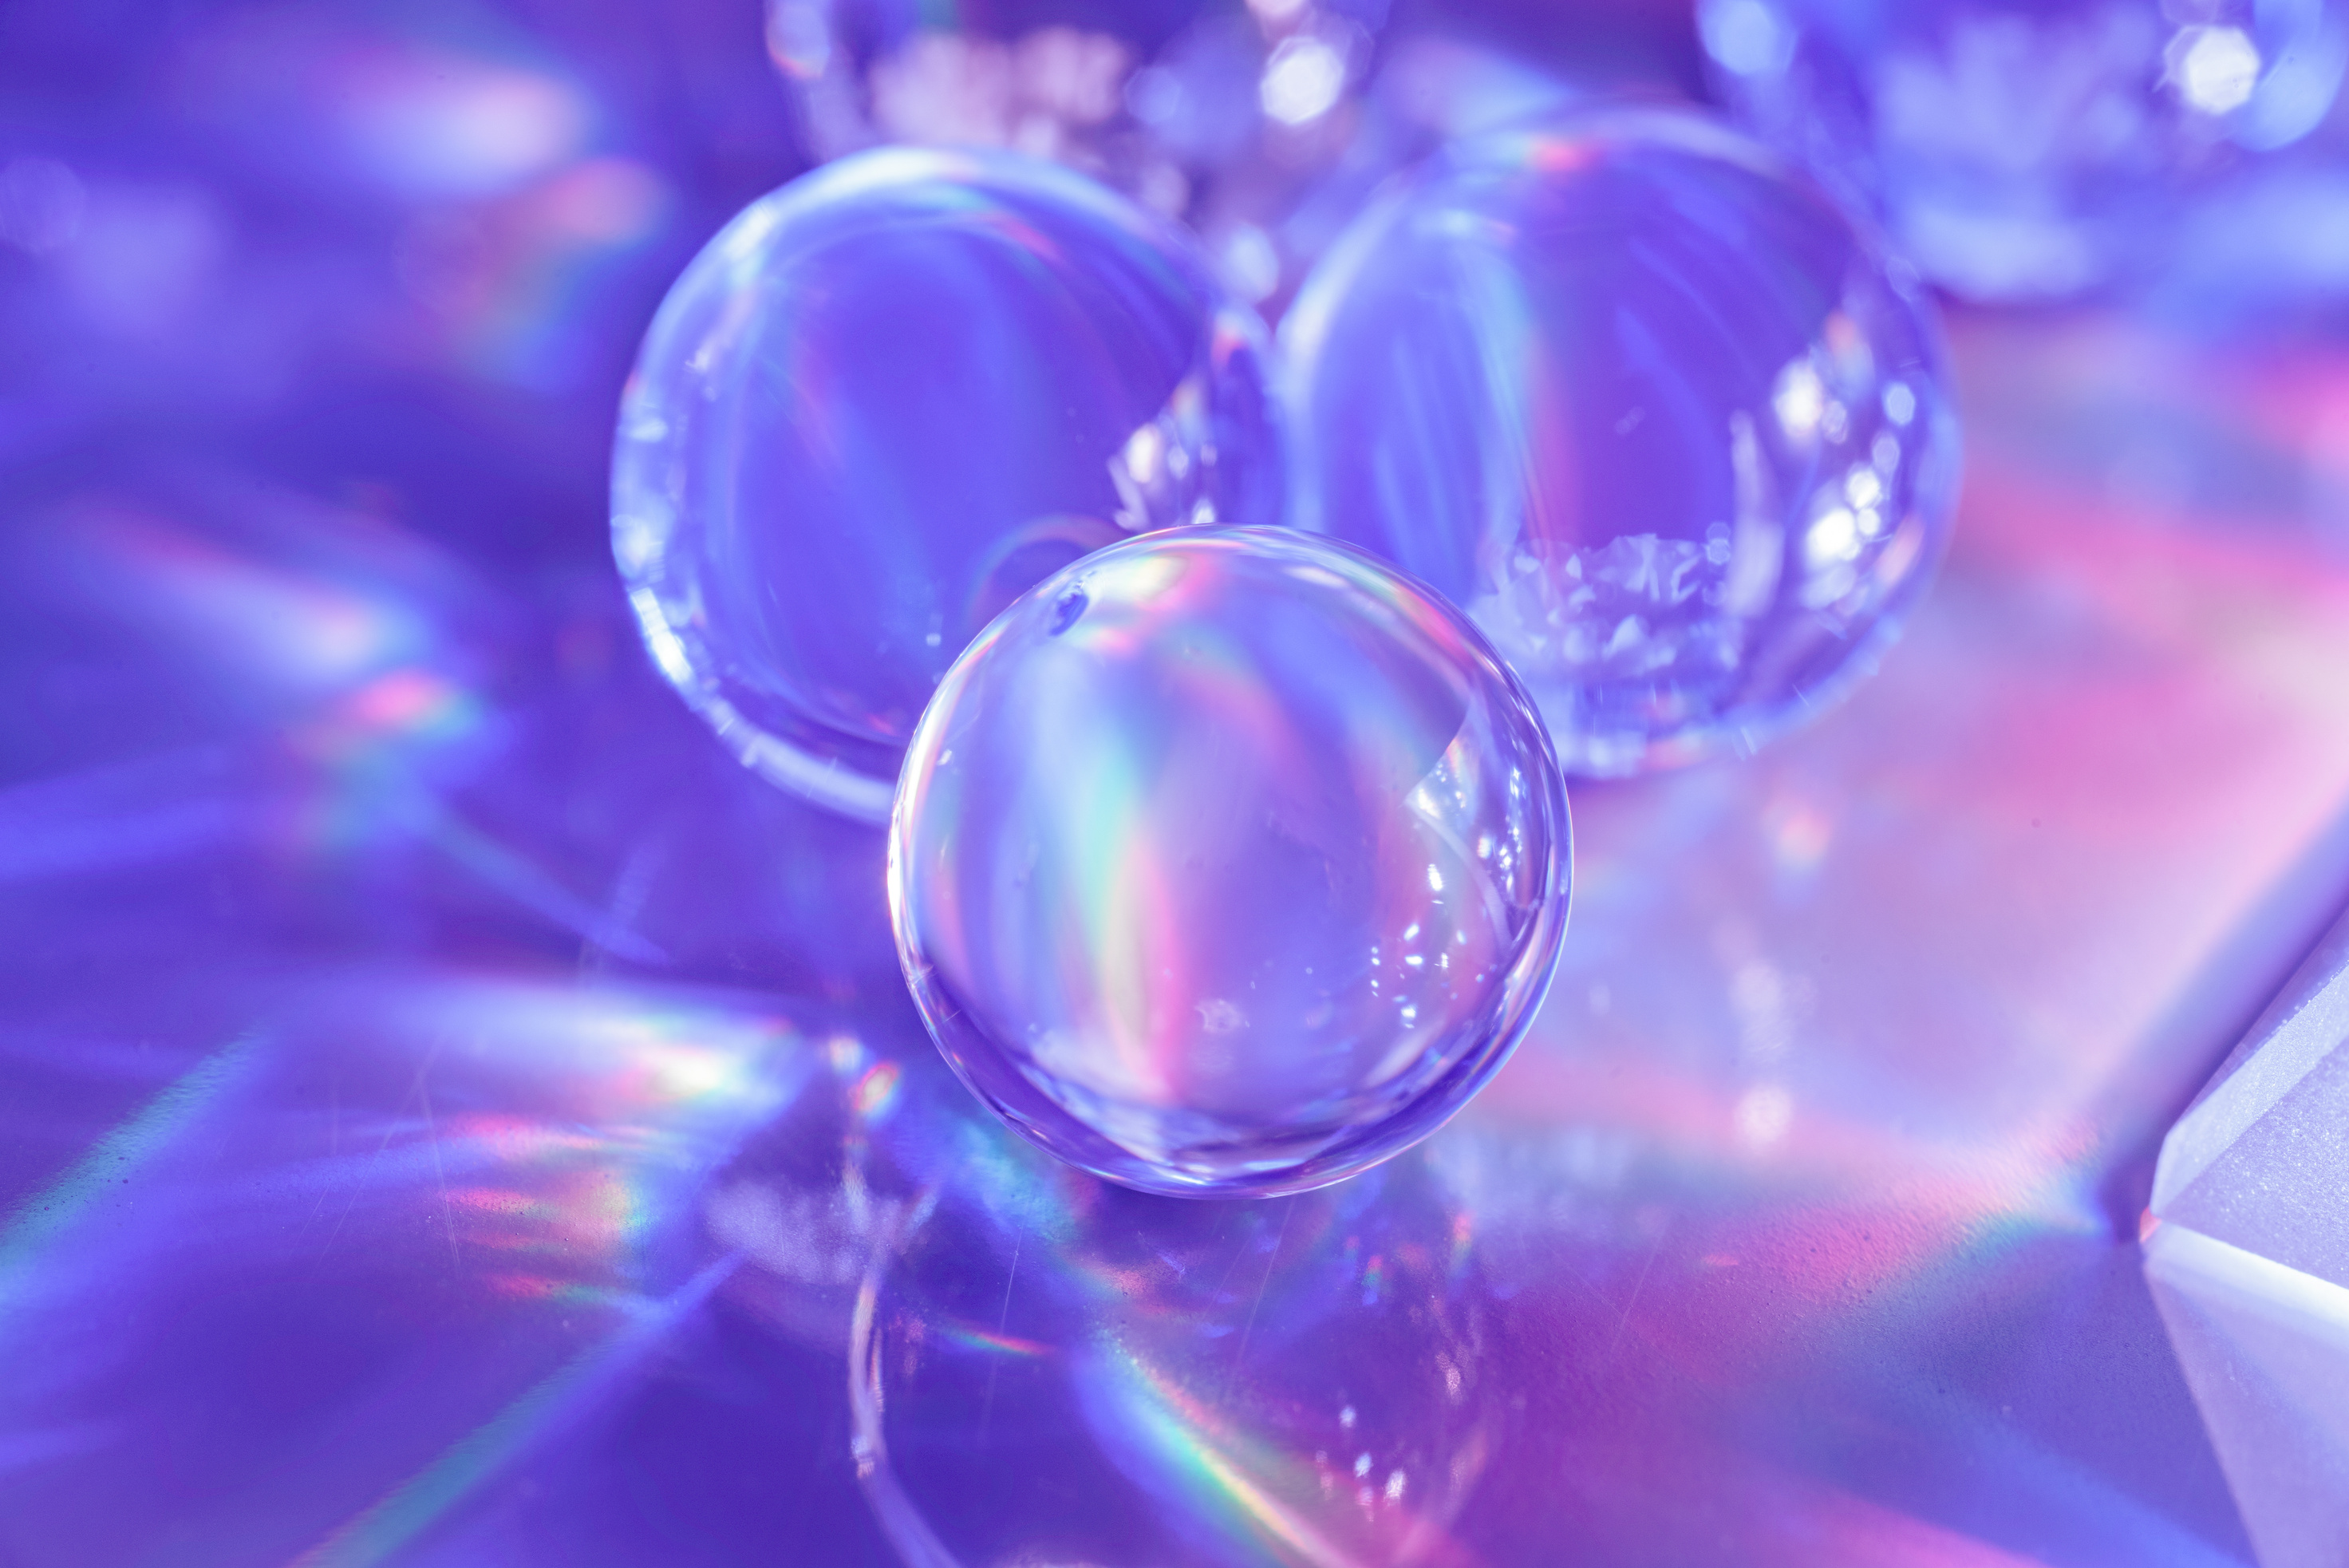 Abstract Crystal Spheres in Lavender Light